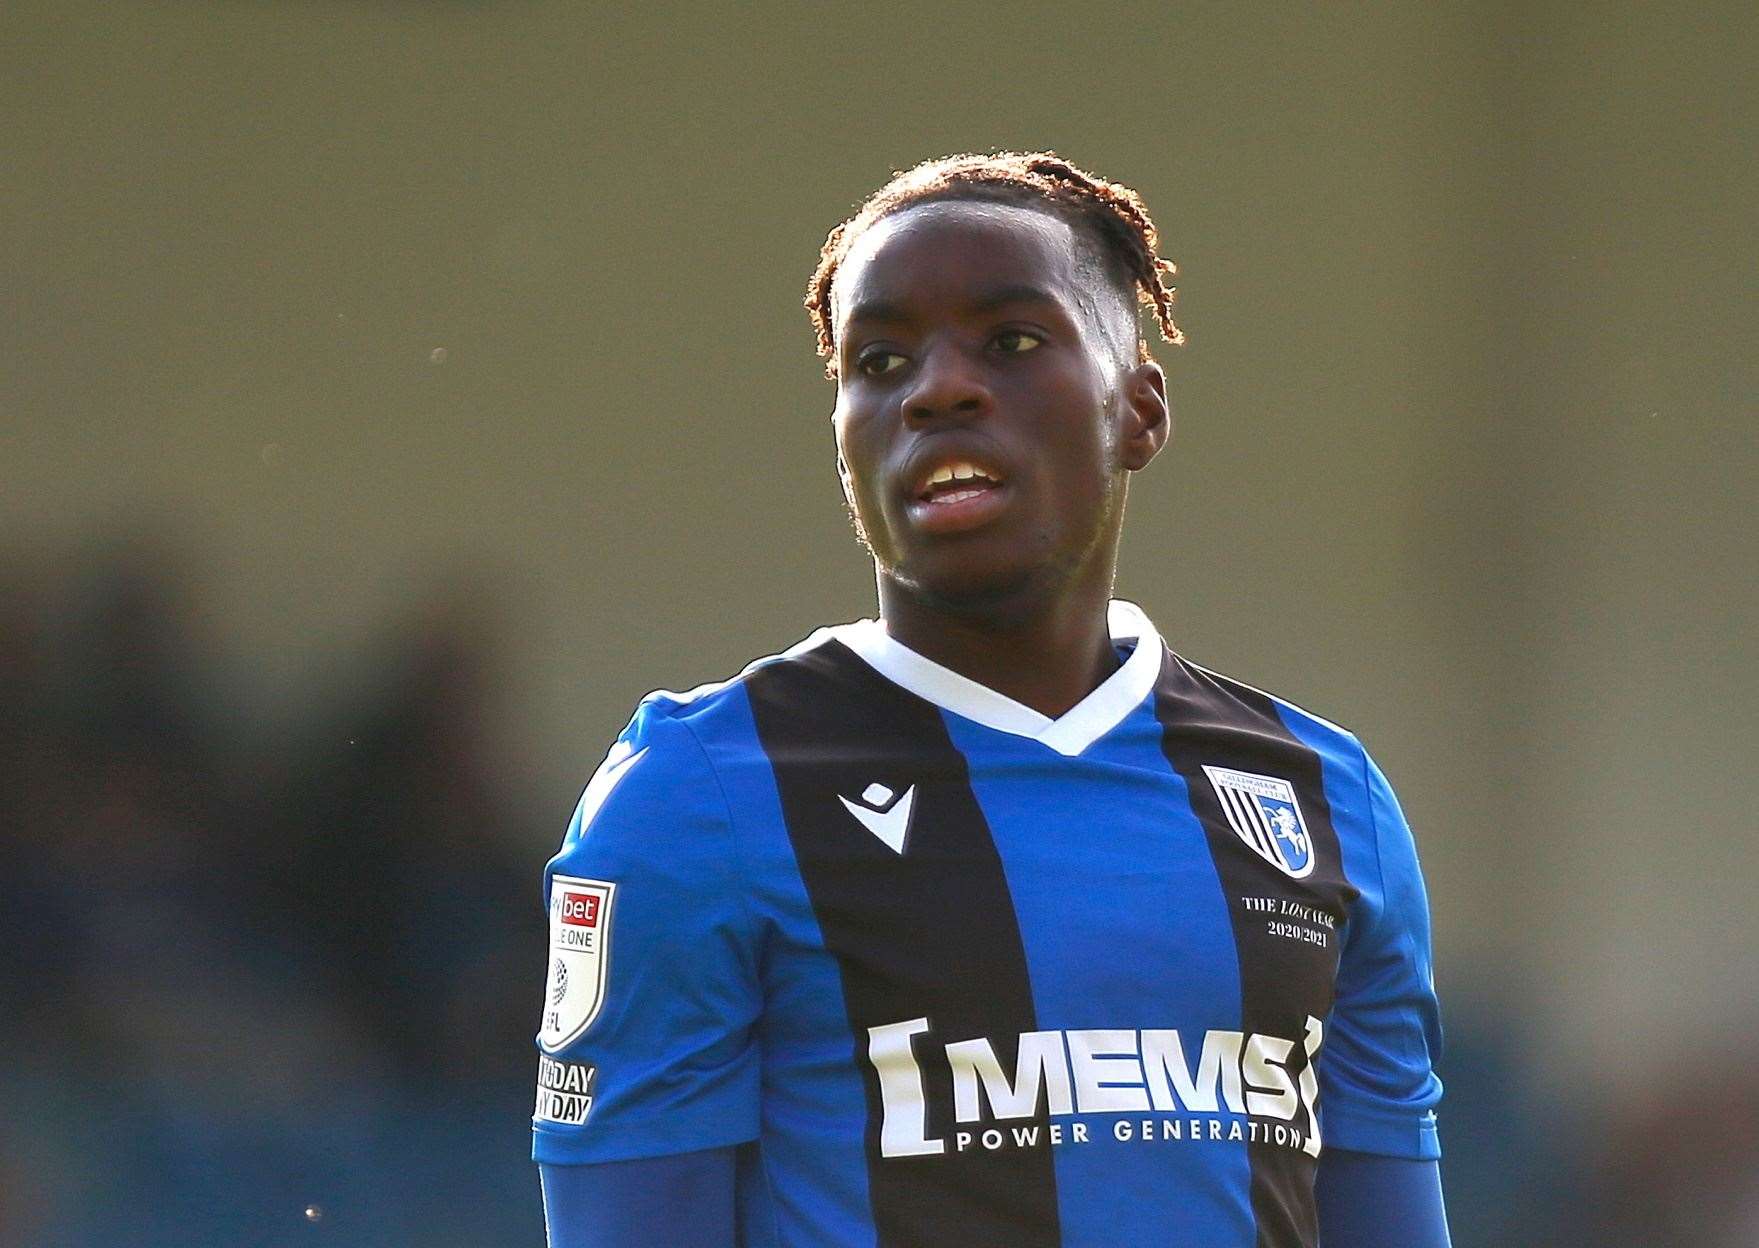 Gerald Sithole made it 1-1 at Priestfield Picture: Andy Jones